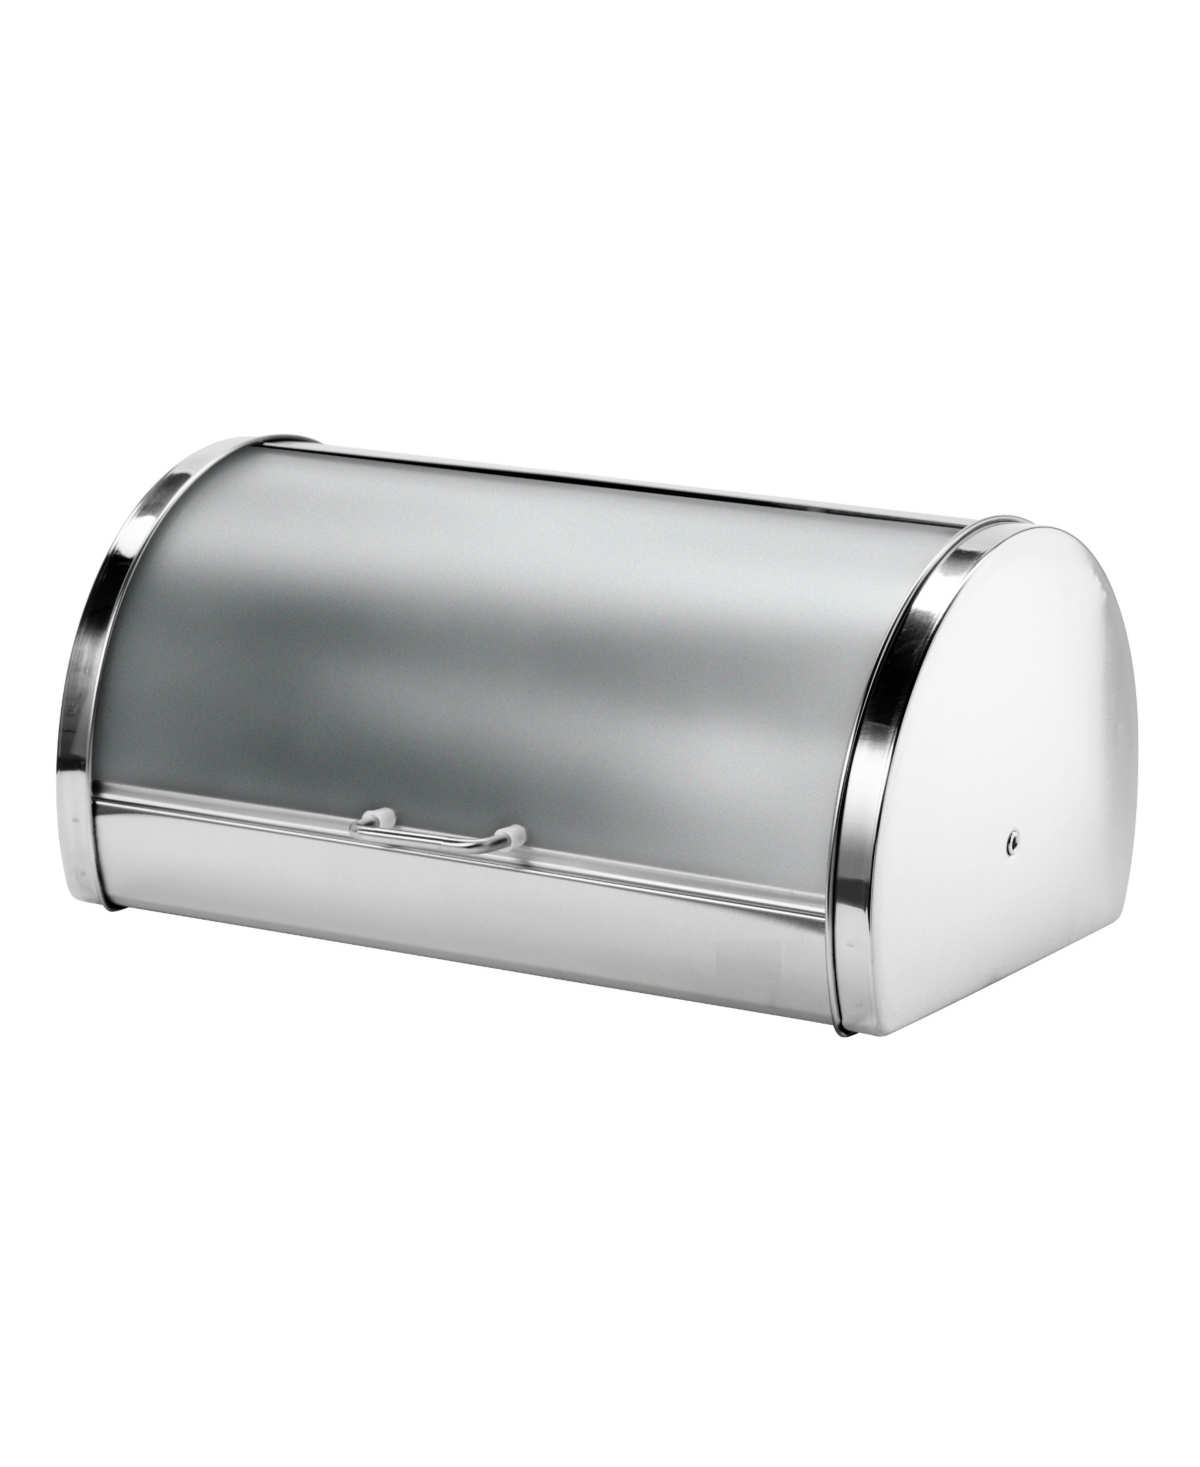 Oggi 7.75" Bread Box With Frosted Lid In Stainless Steel